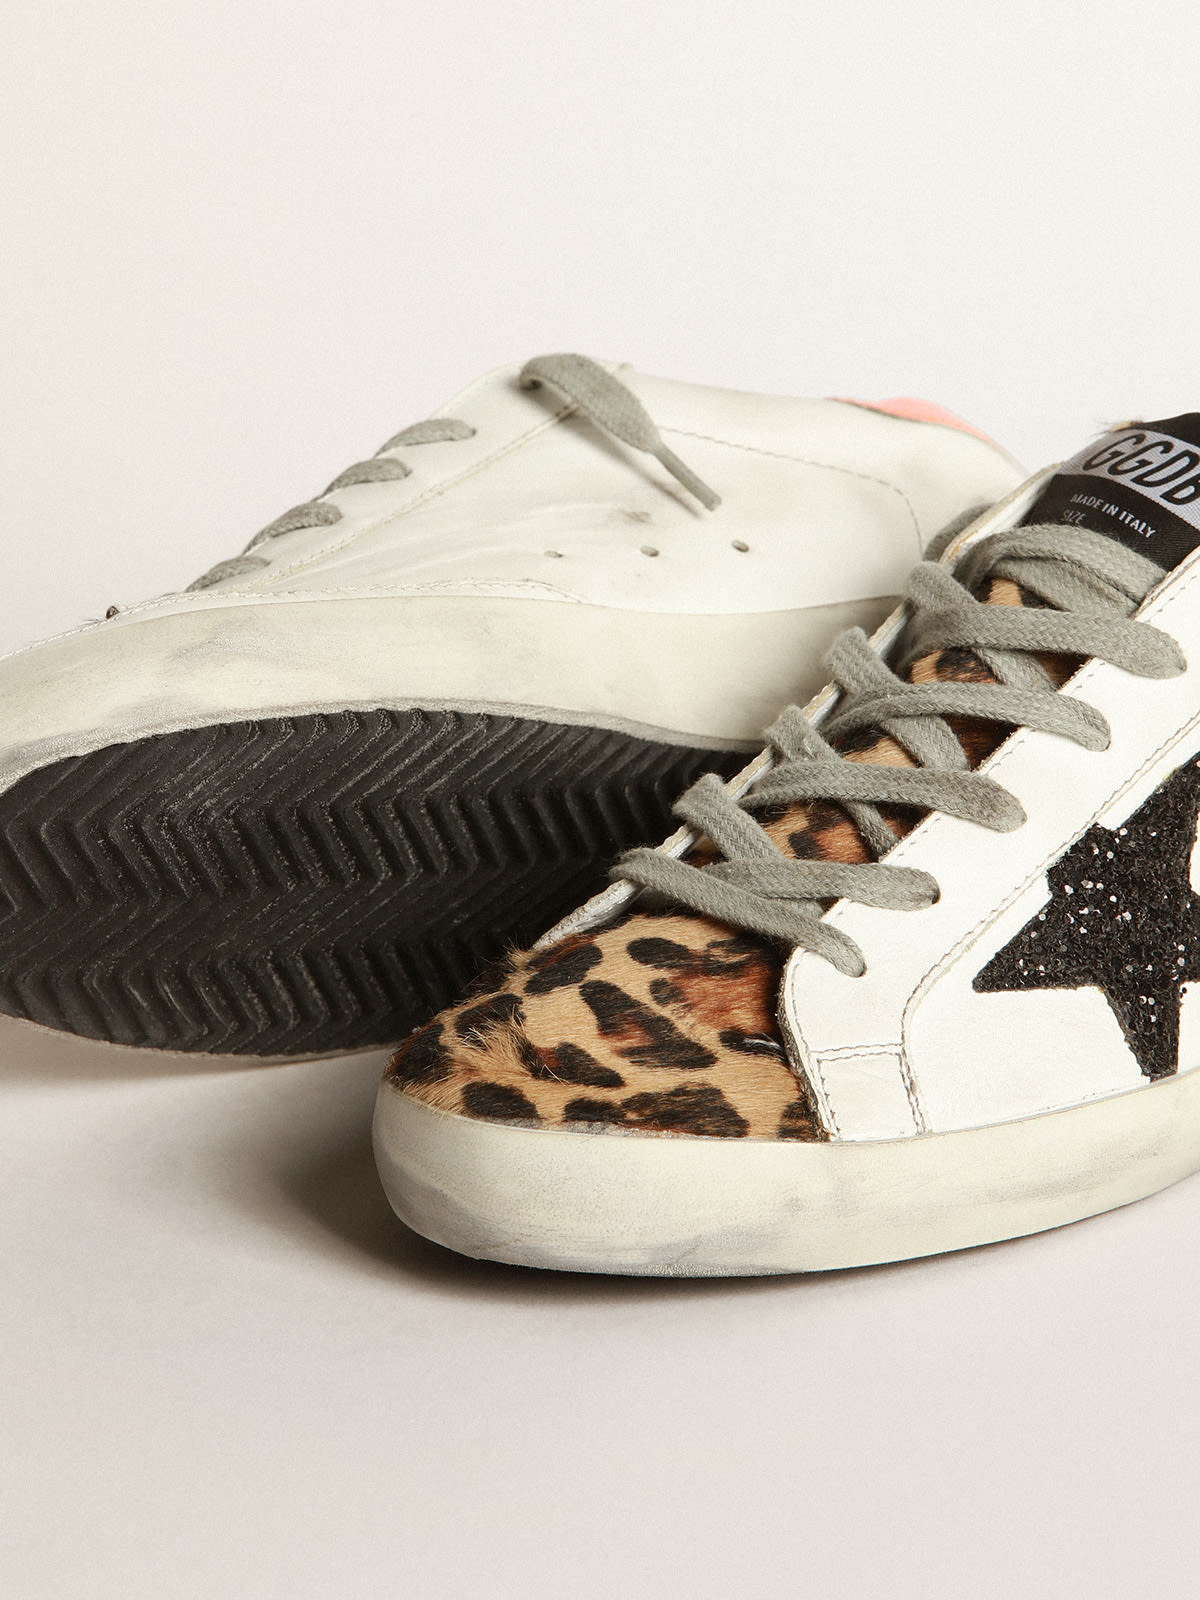 Golden Goose - Super-Star sneakers with leopard-print insert, glittery star and orange heel tab in 